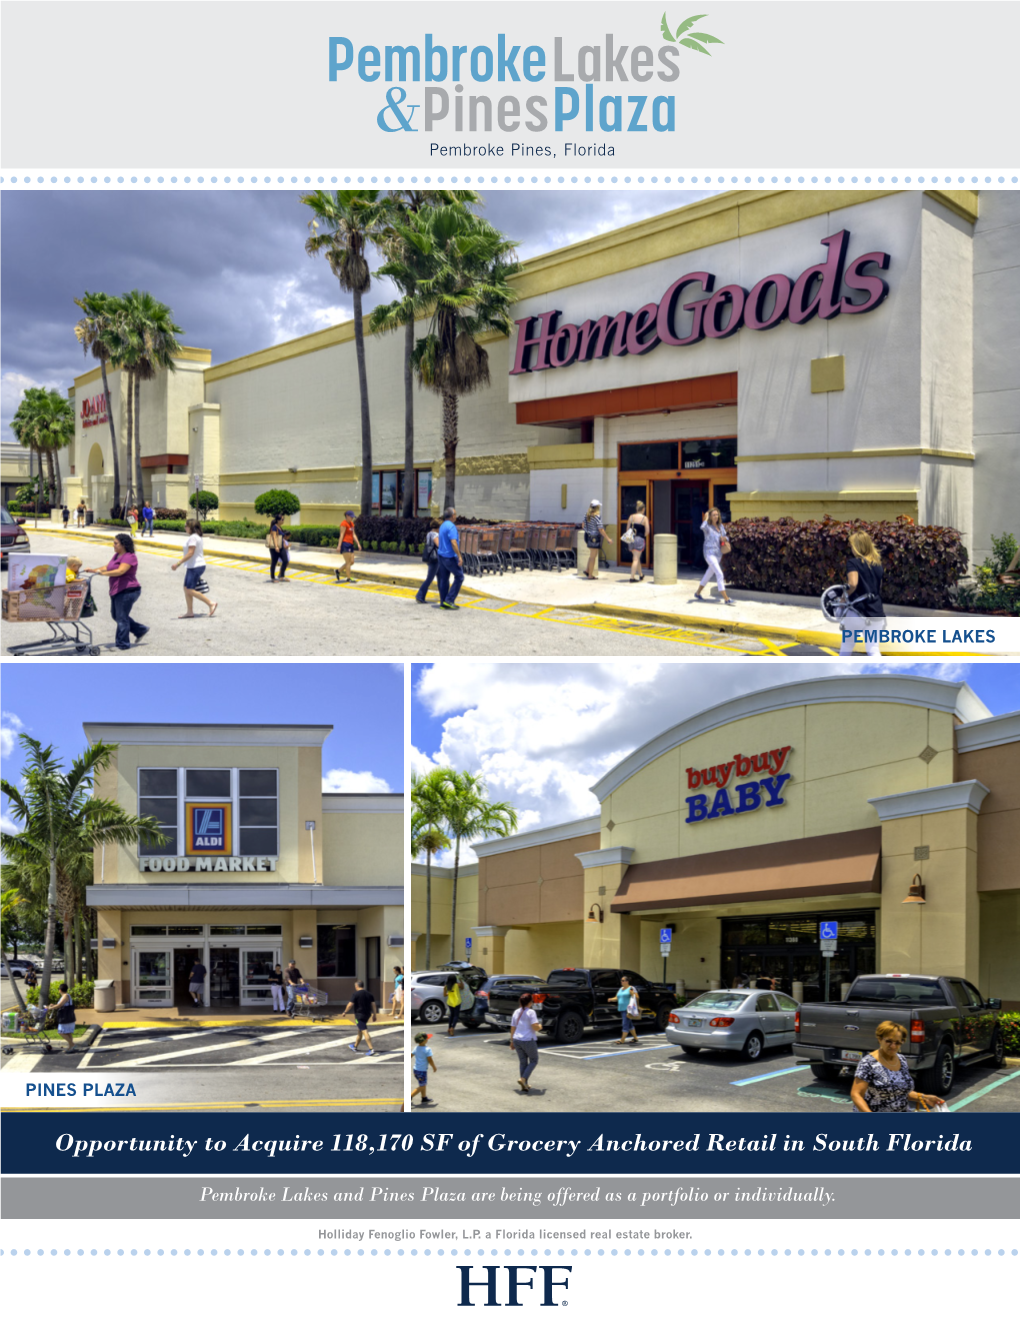 Opportunity to Acquire 118,170 SF of Grocery Anchored Retail in South Florida